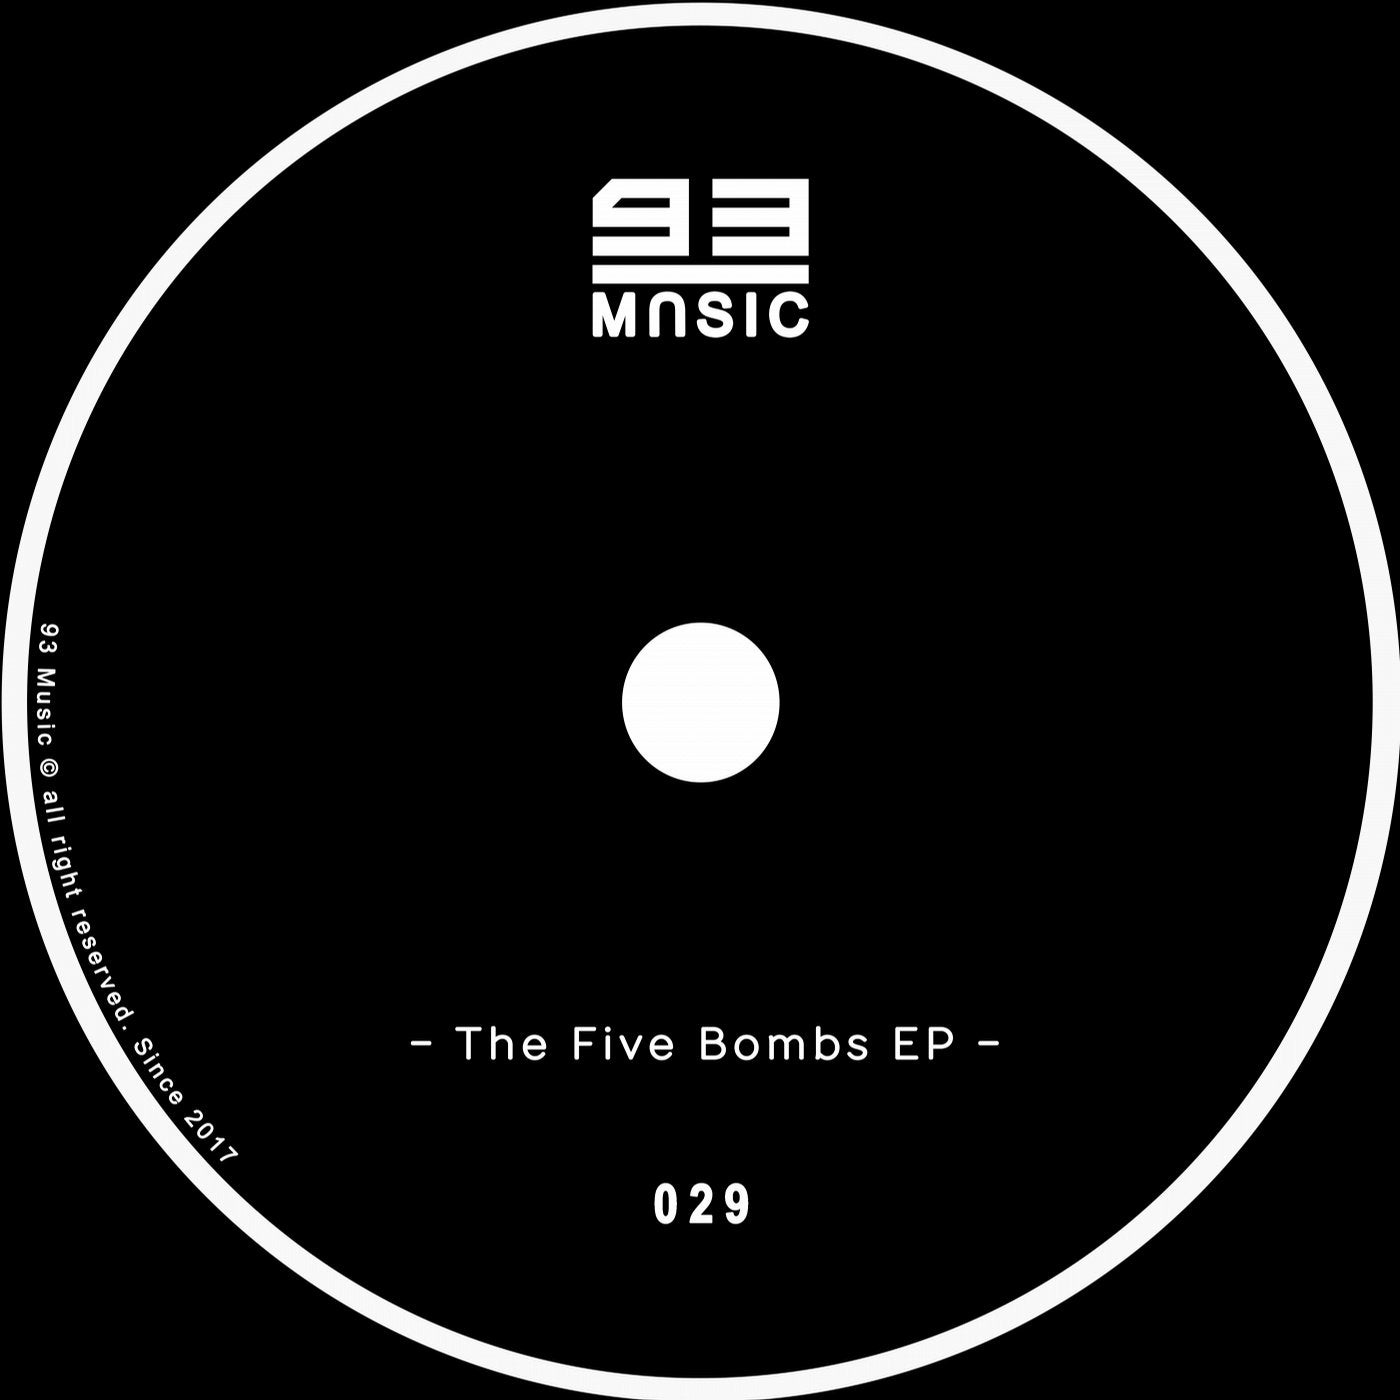 The Five Bombs EP